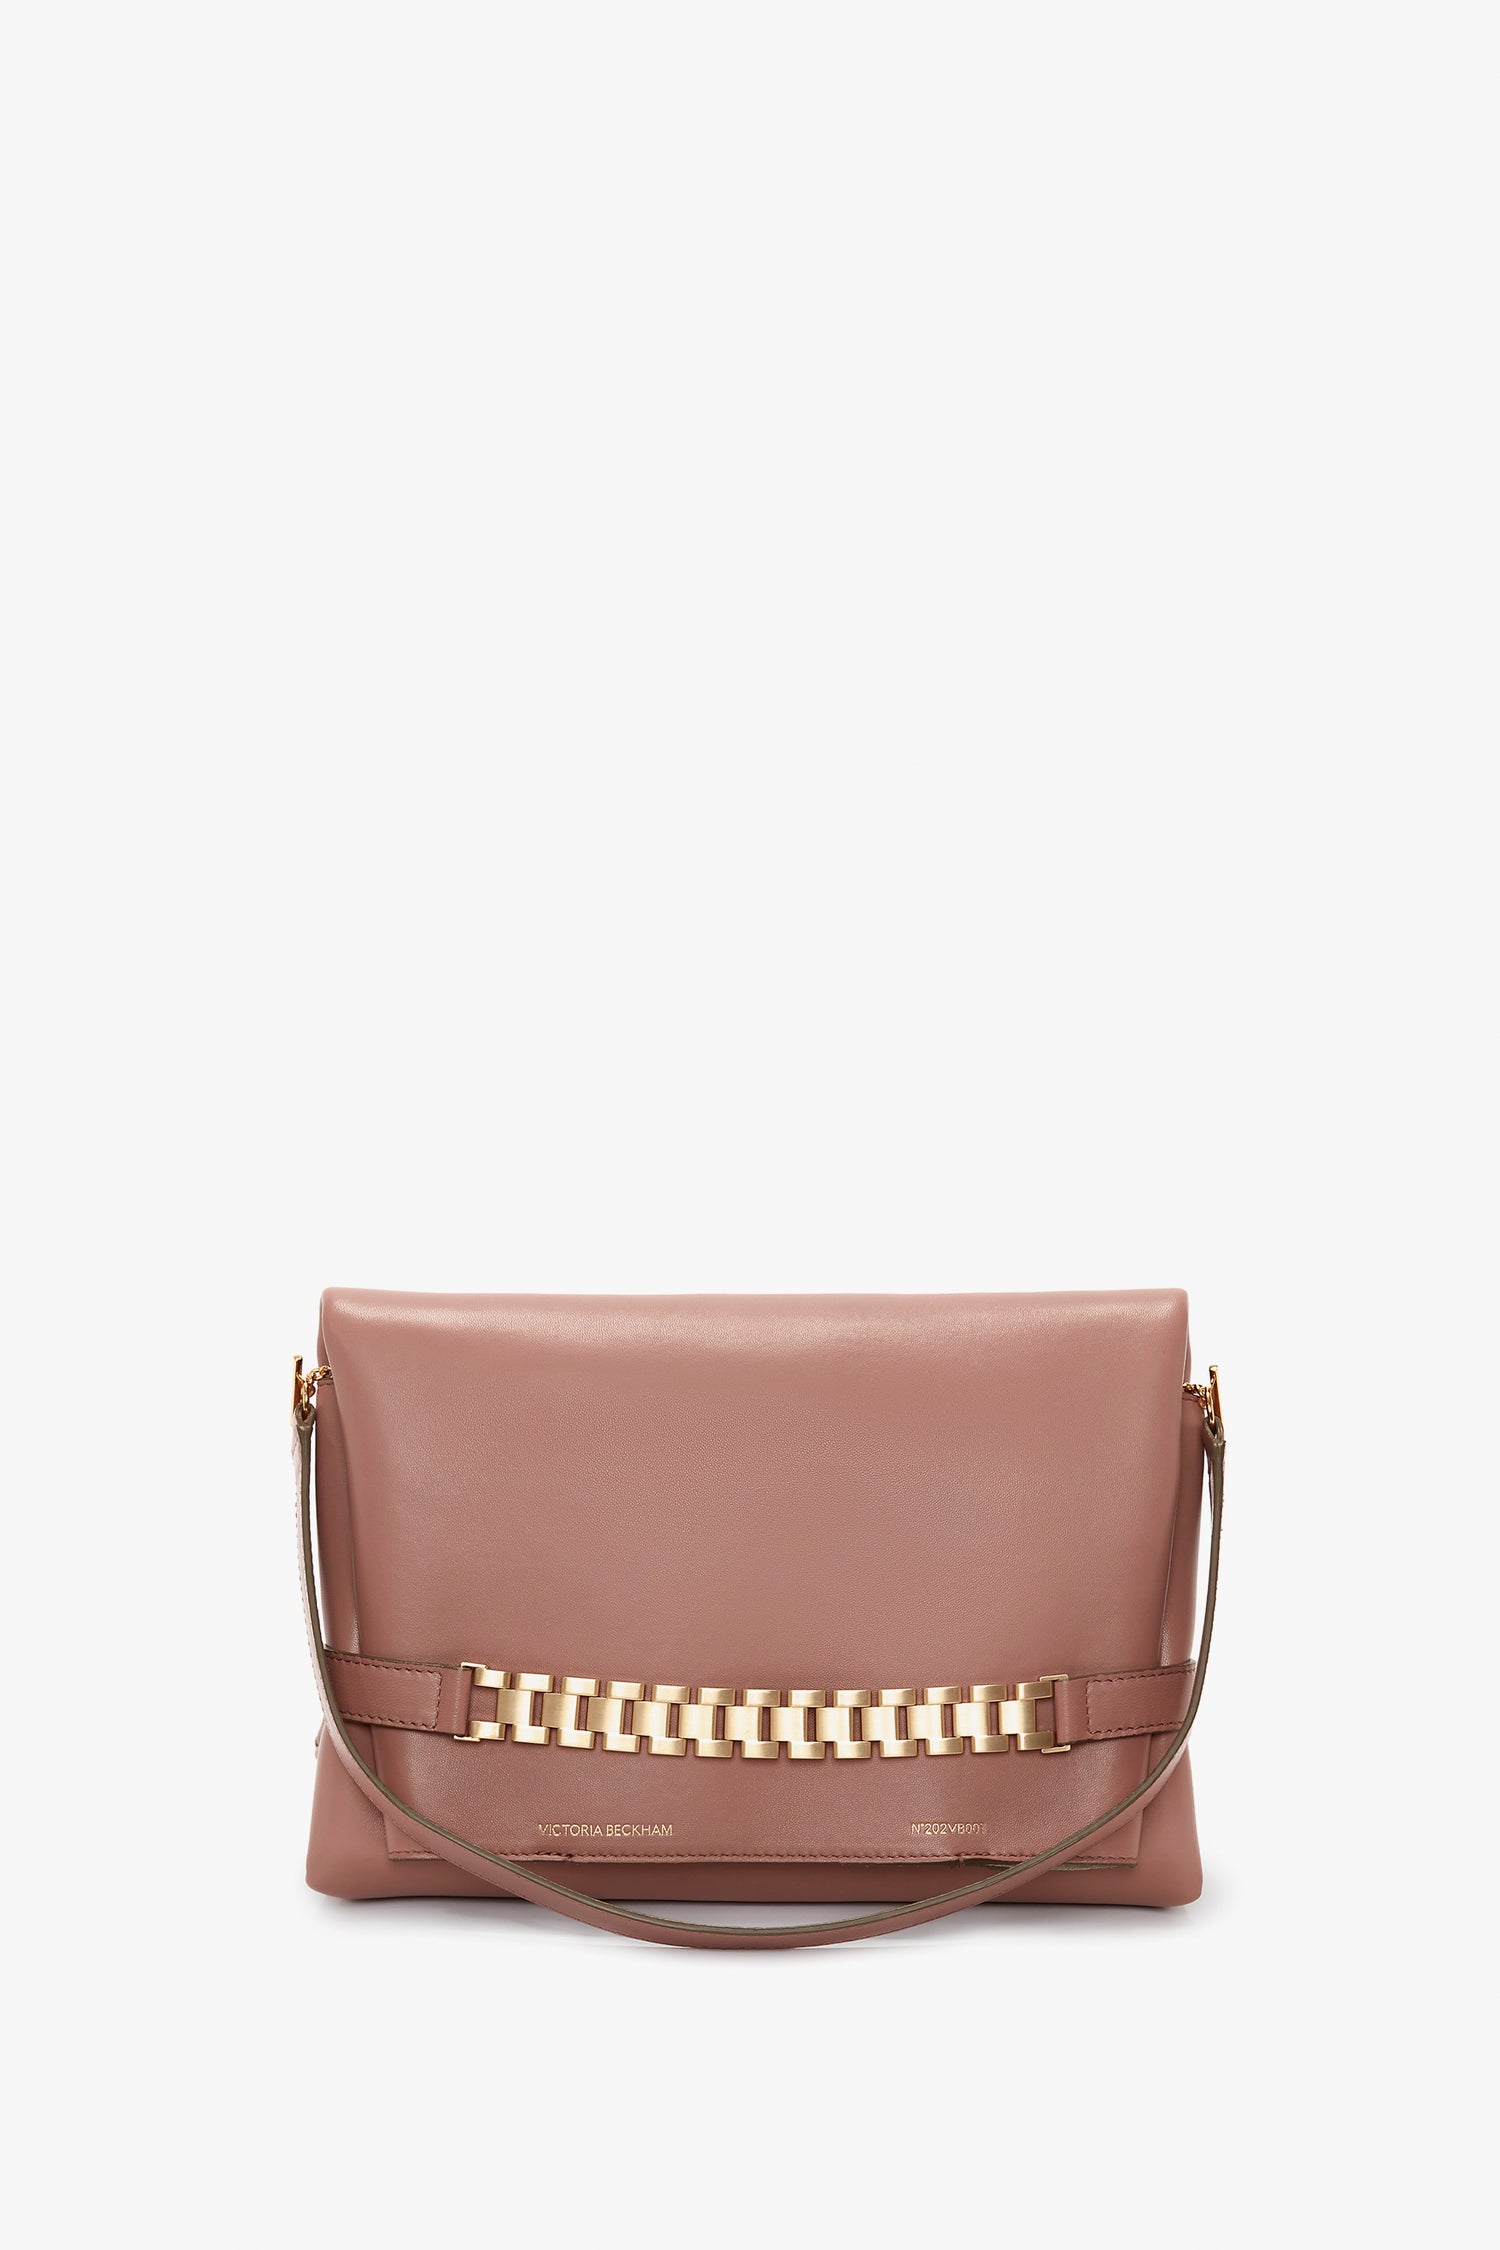 Chain Pouch With Strap In Truffle Leather – Victoria Beckham UK